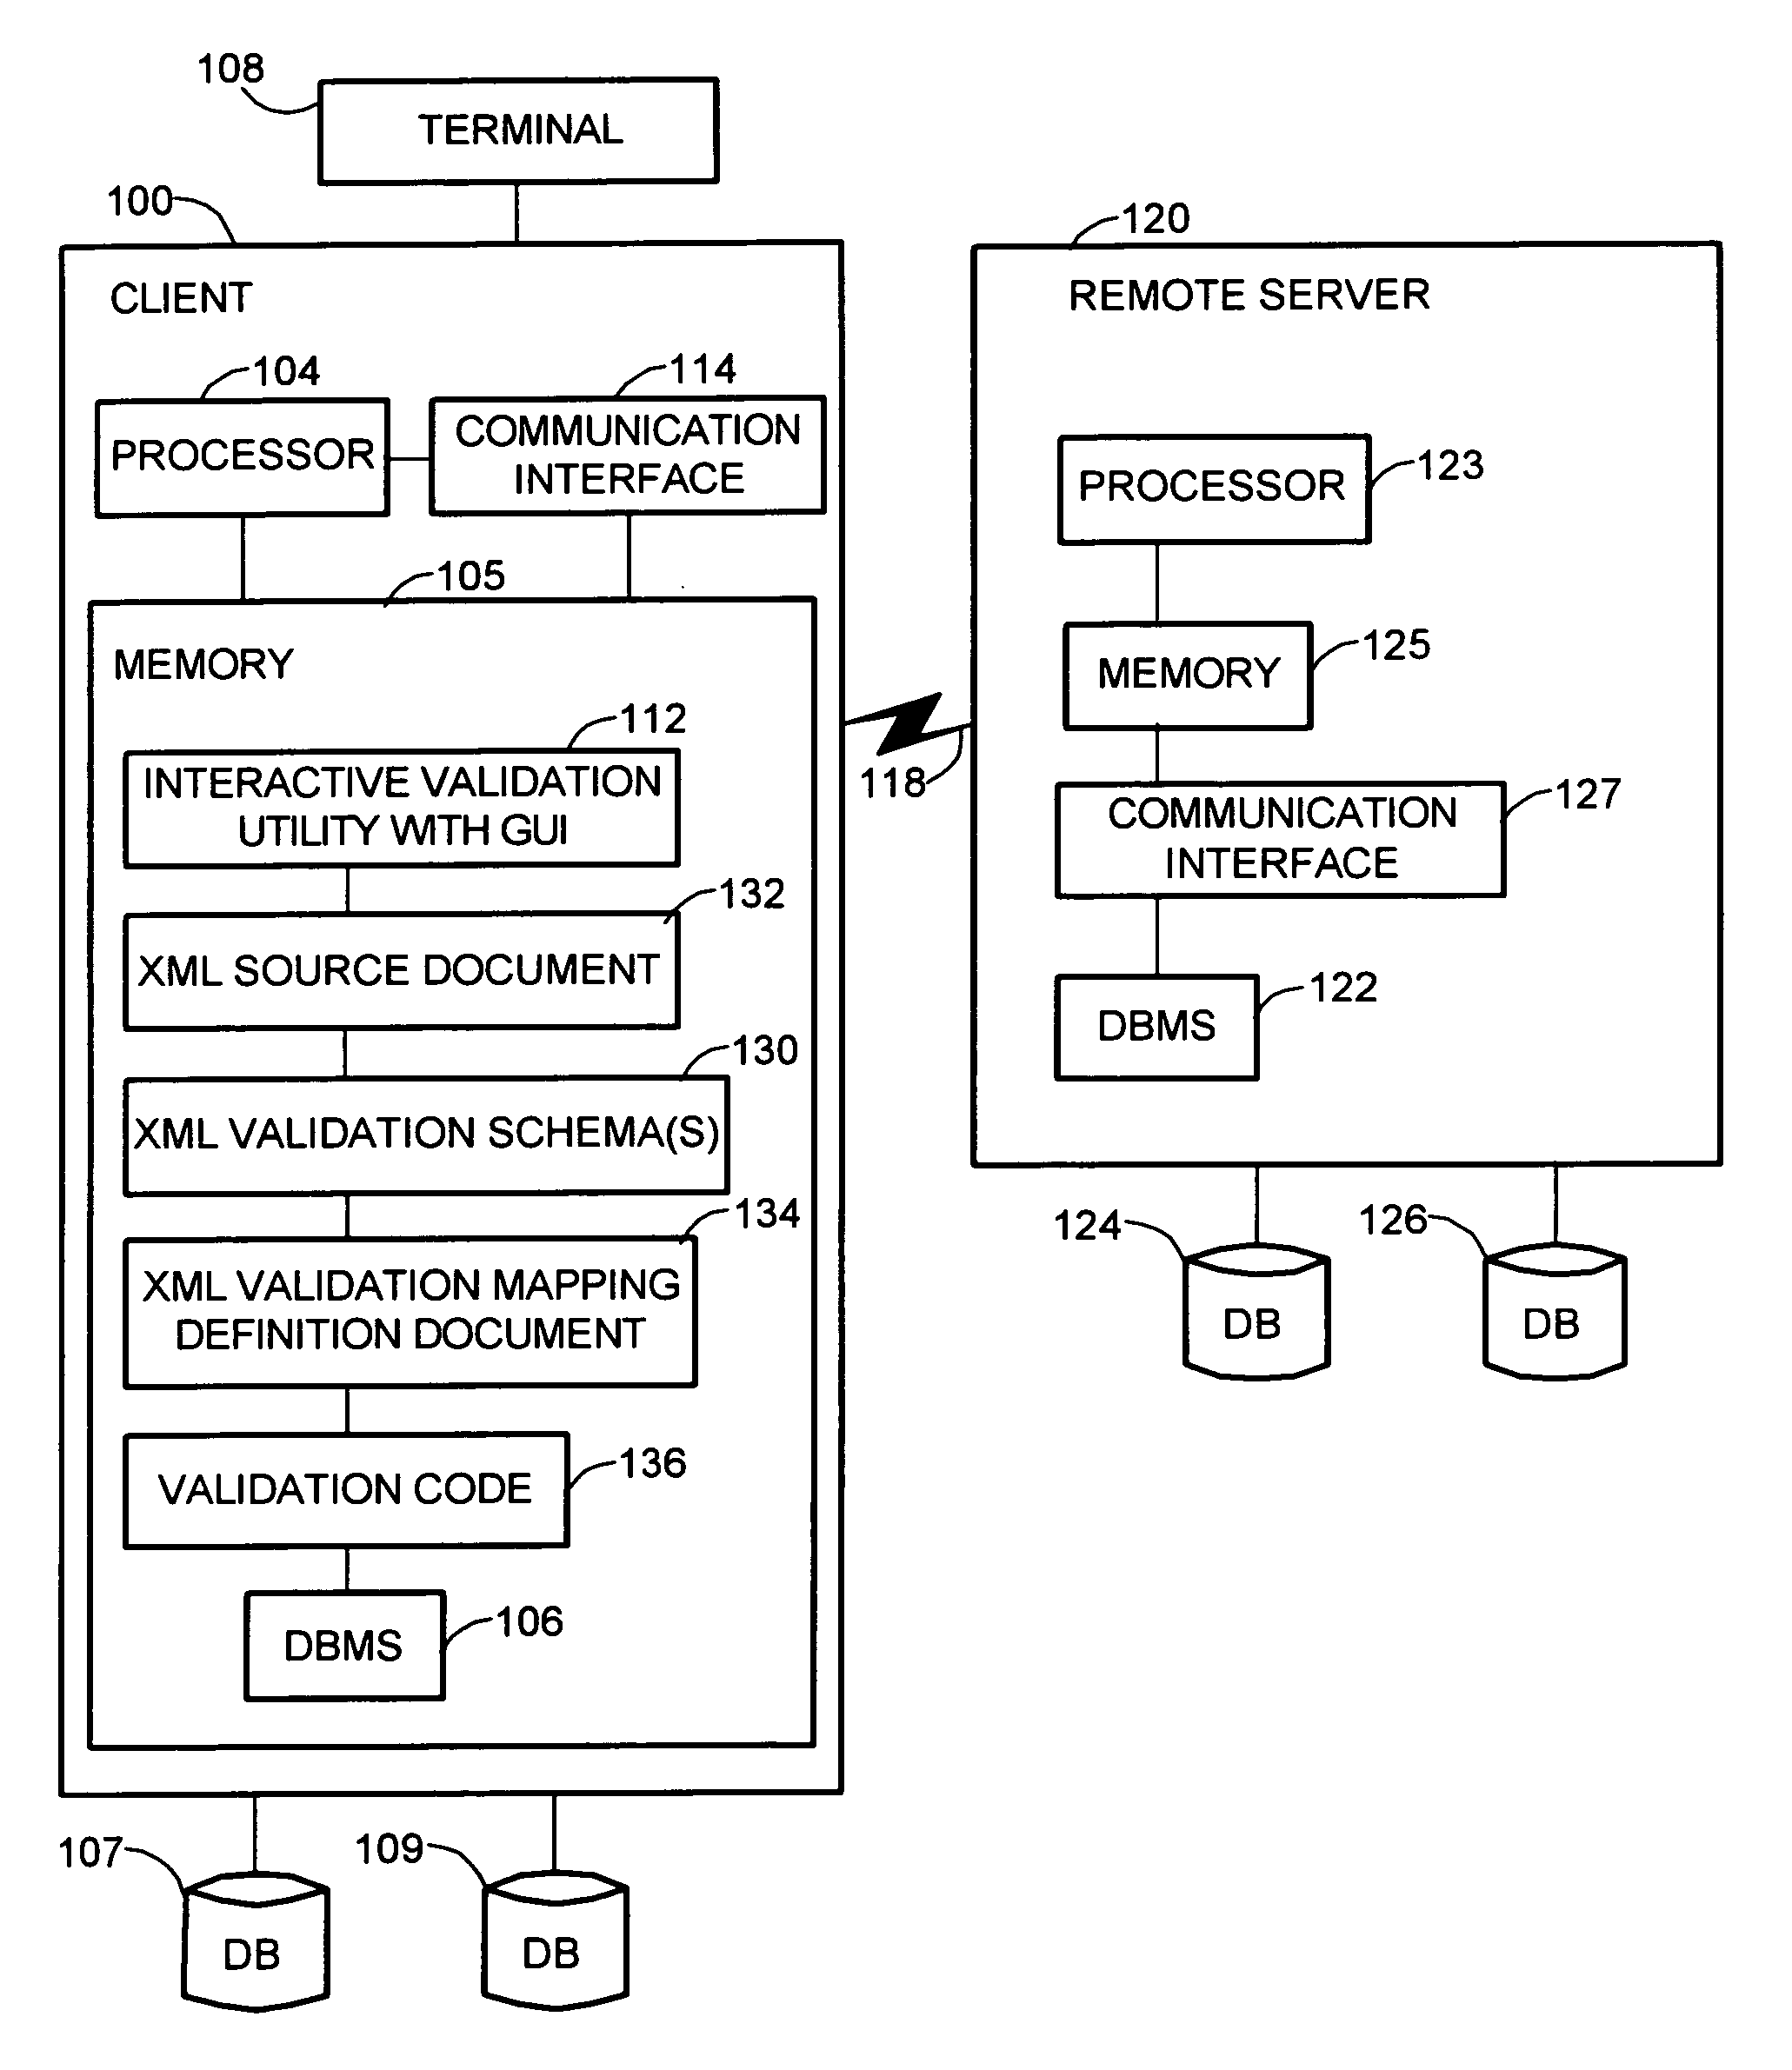 Automated interactive visual mapping utility and method for validation and storage of XML data